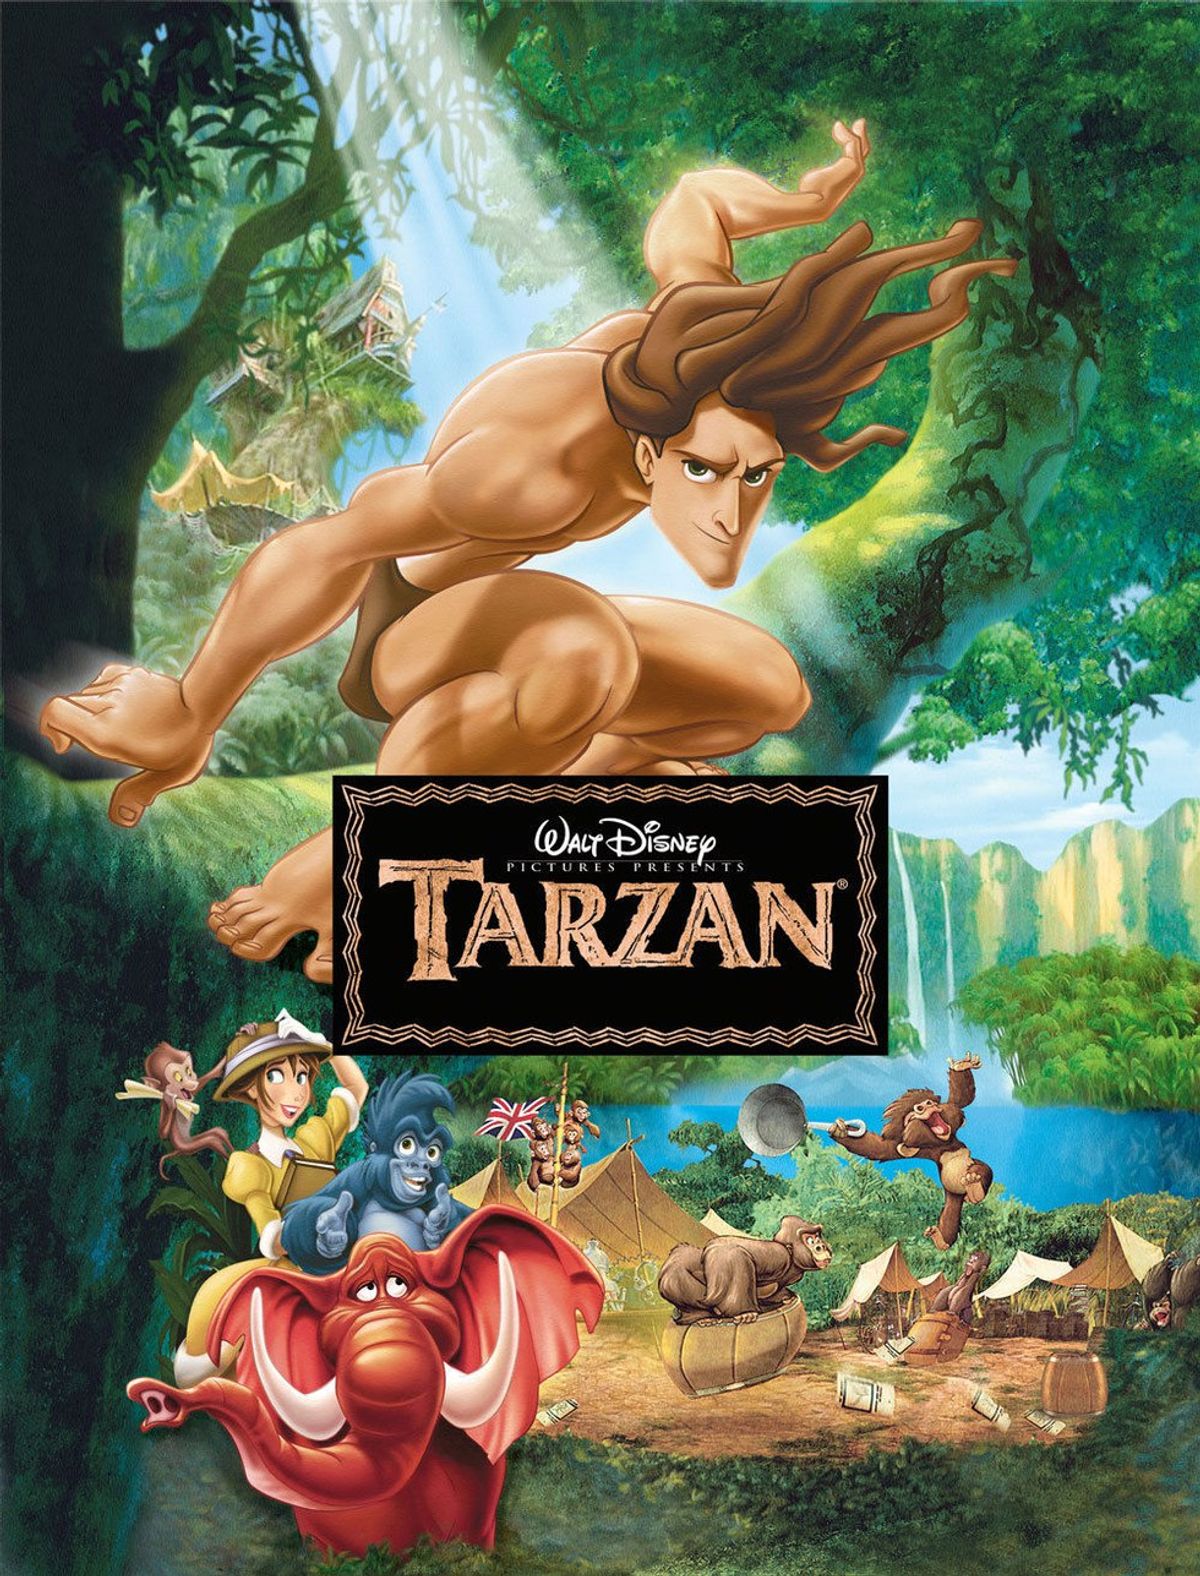 A Few Facts You Didn't Know About Tarzan